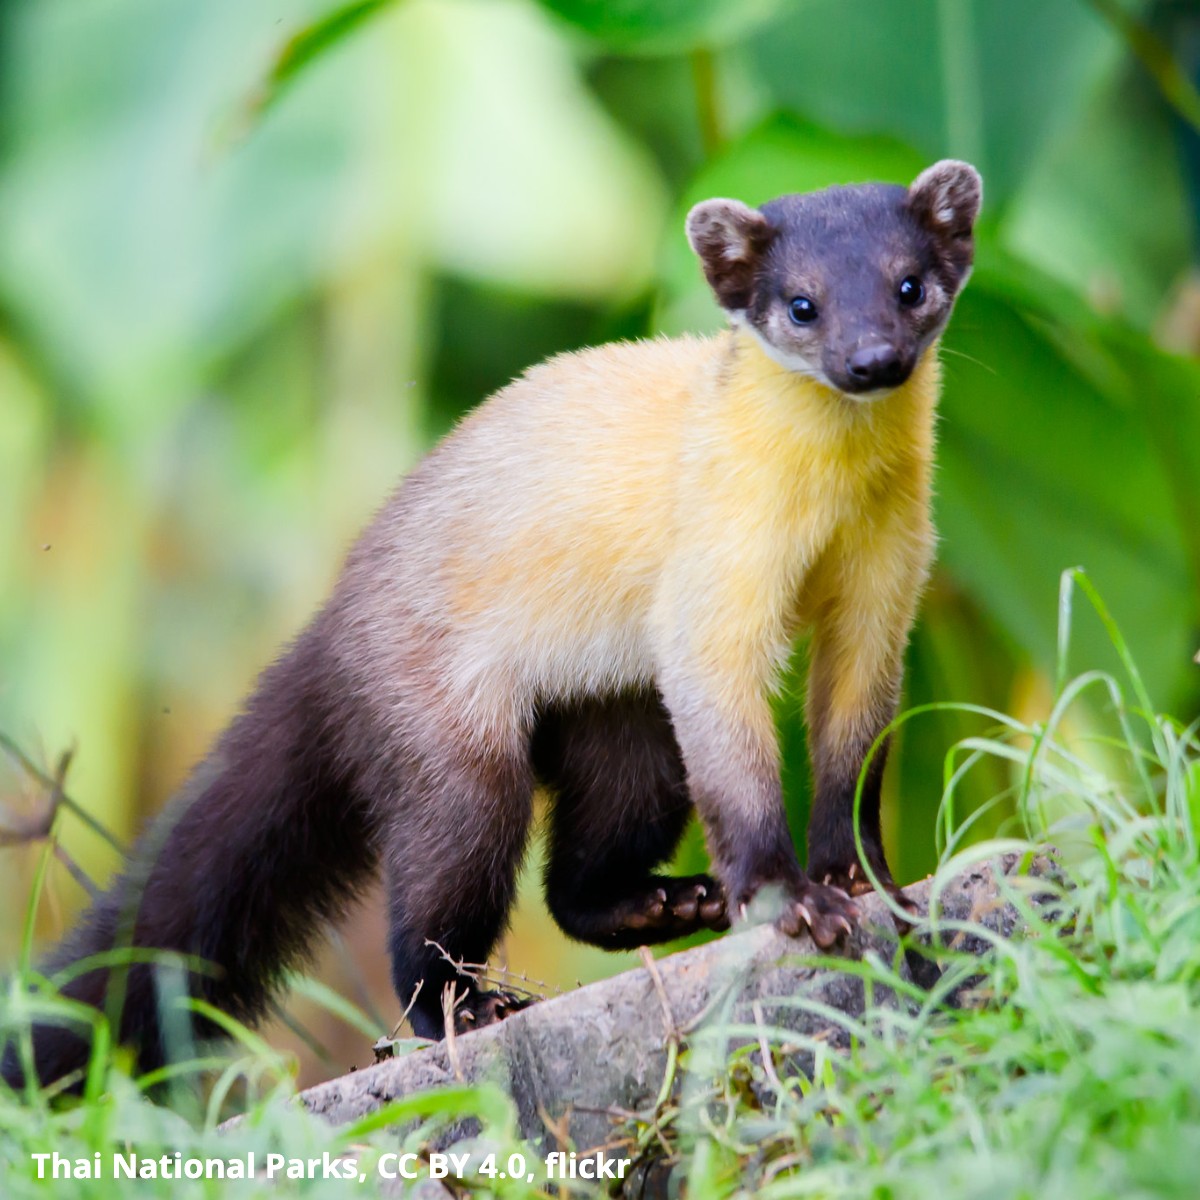 Meet the yellow-throated marten! Unlike other mustelids, this critter often travels with two to three other individuals. Hunting as a group helps it take down large prey, like musk deer, on occasion. Its typical meals include small mammals, reptiles, fruit, insects, & birds.